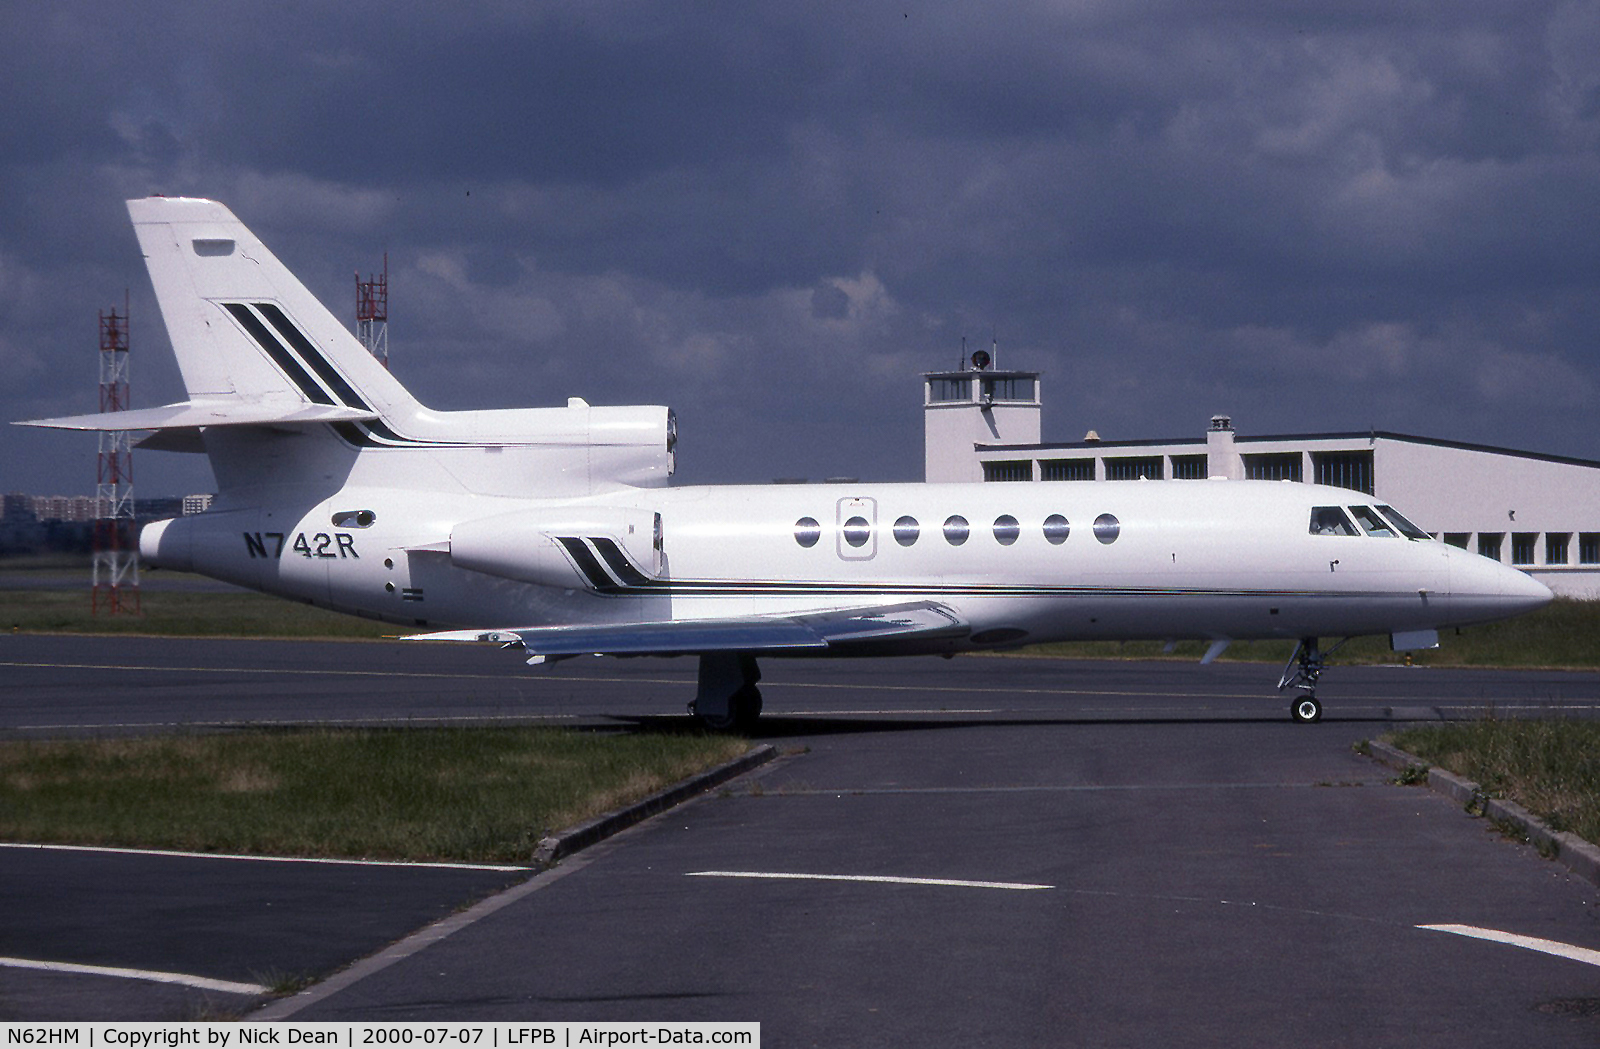 N62HM, 1995 Dassault Falcon 50 C/N 243, Seen here as N742R this airframe is currently registered N62HM as posted